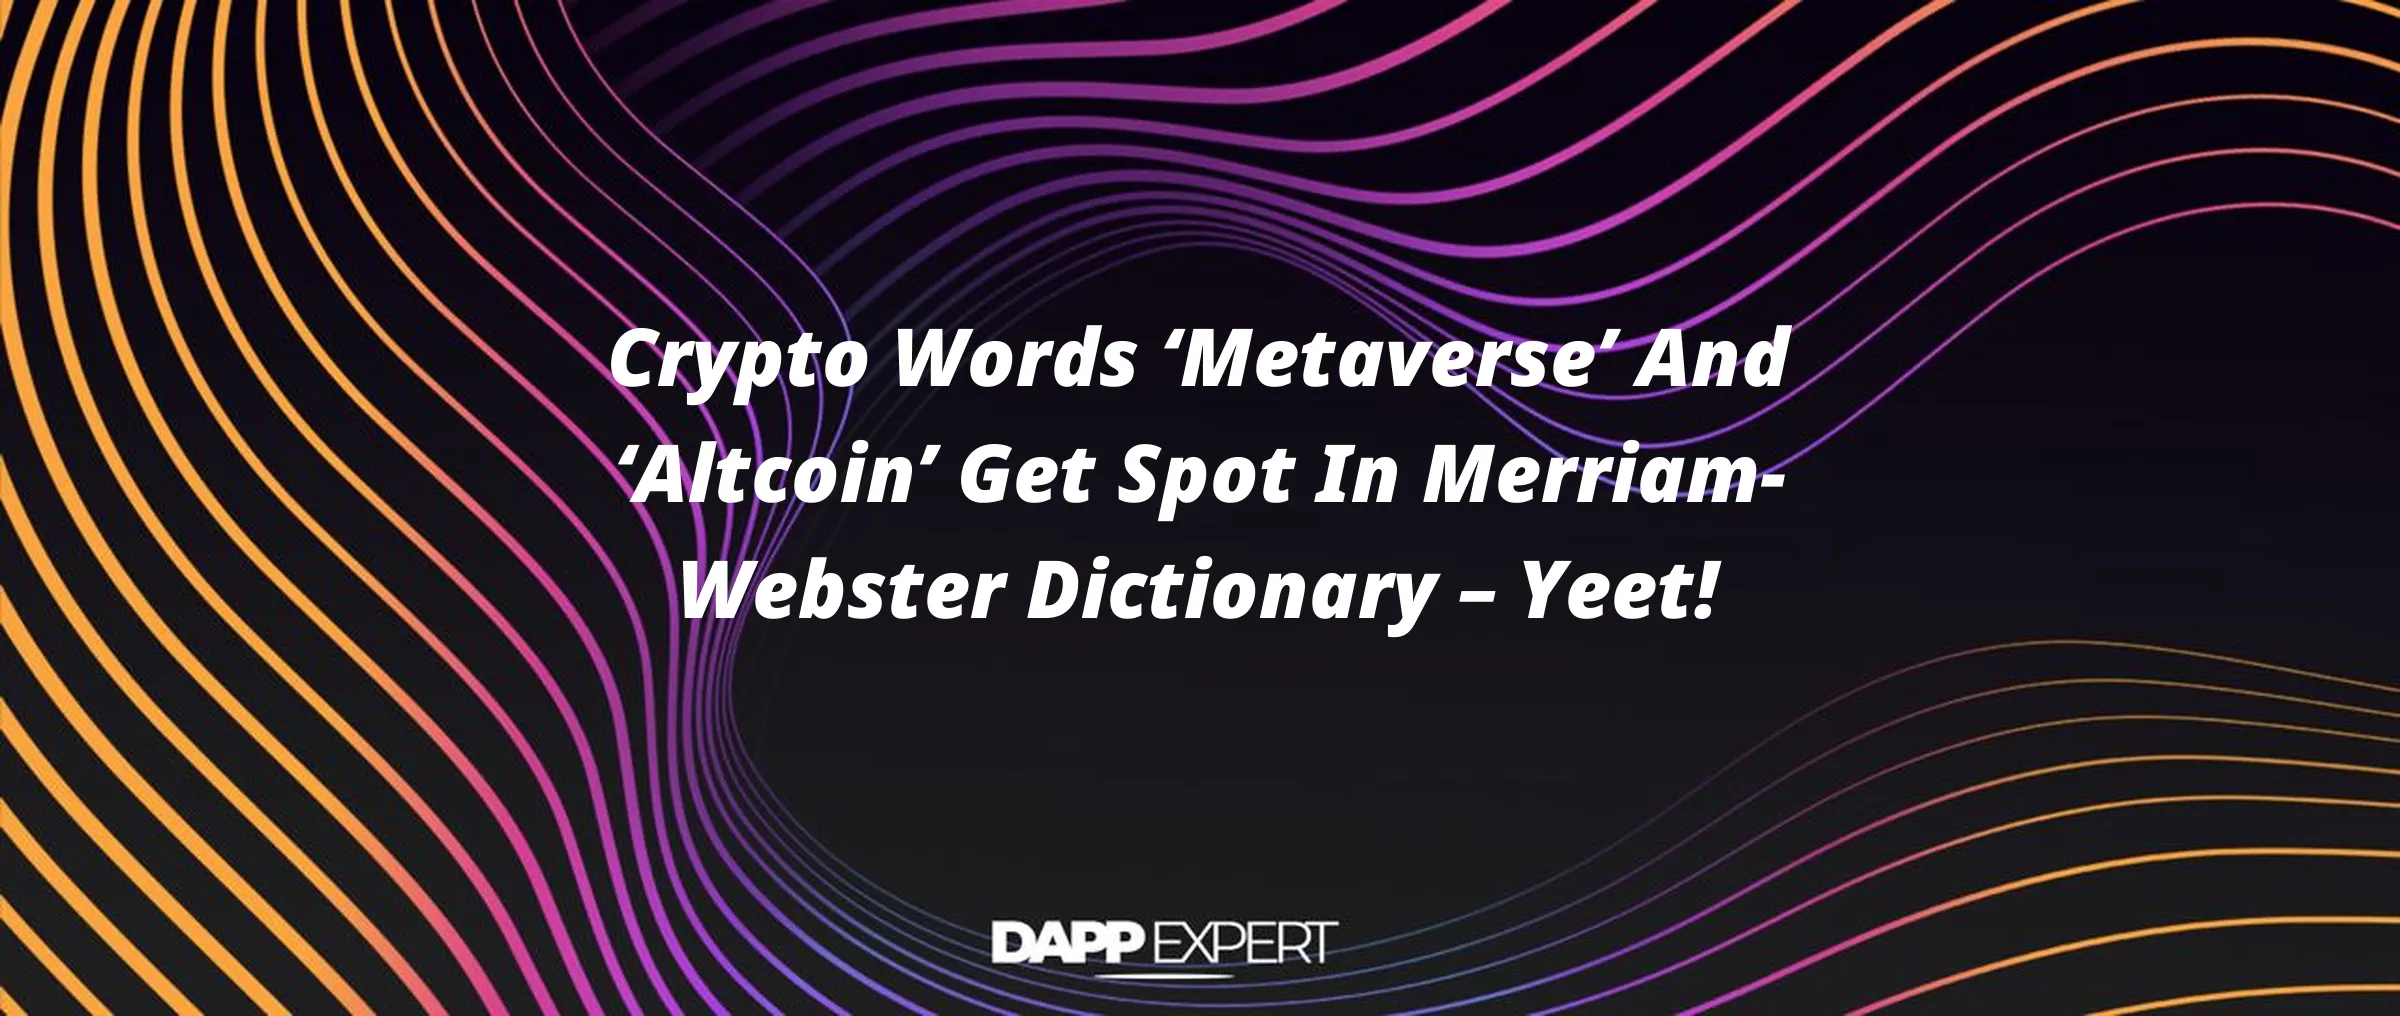 Crypto Words ‘Metaverse’ And ‘Altcoin’ Get Spot In Merriam-Webster Dictionary – Yeet!